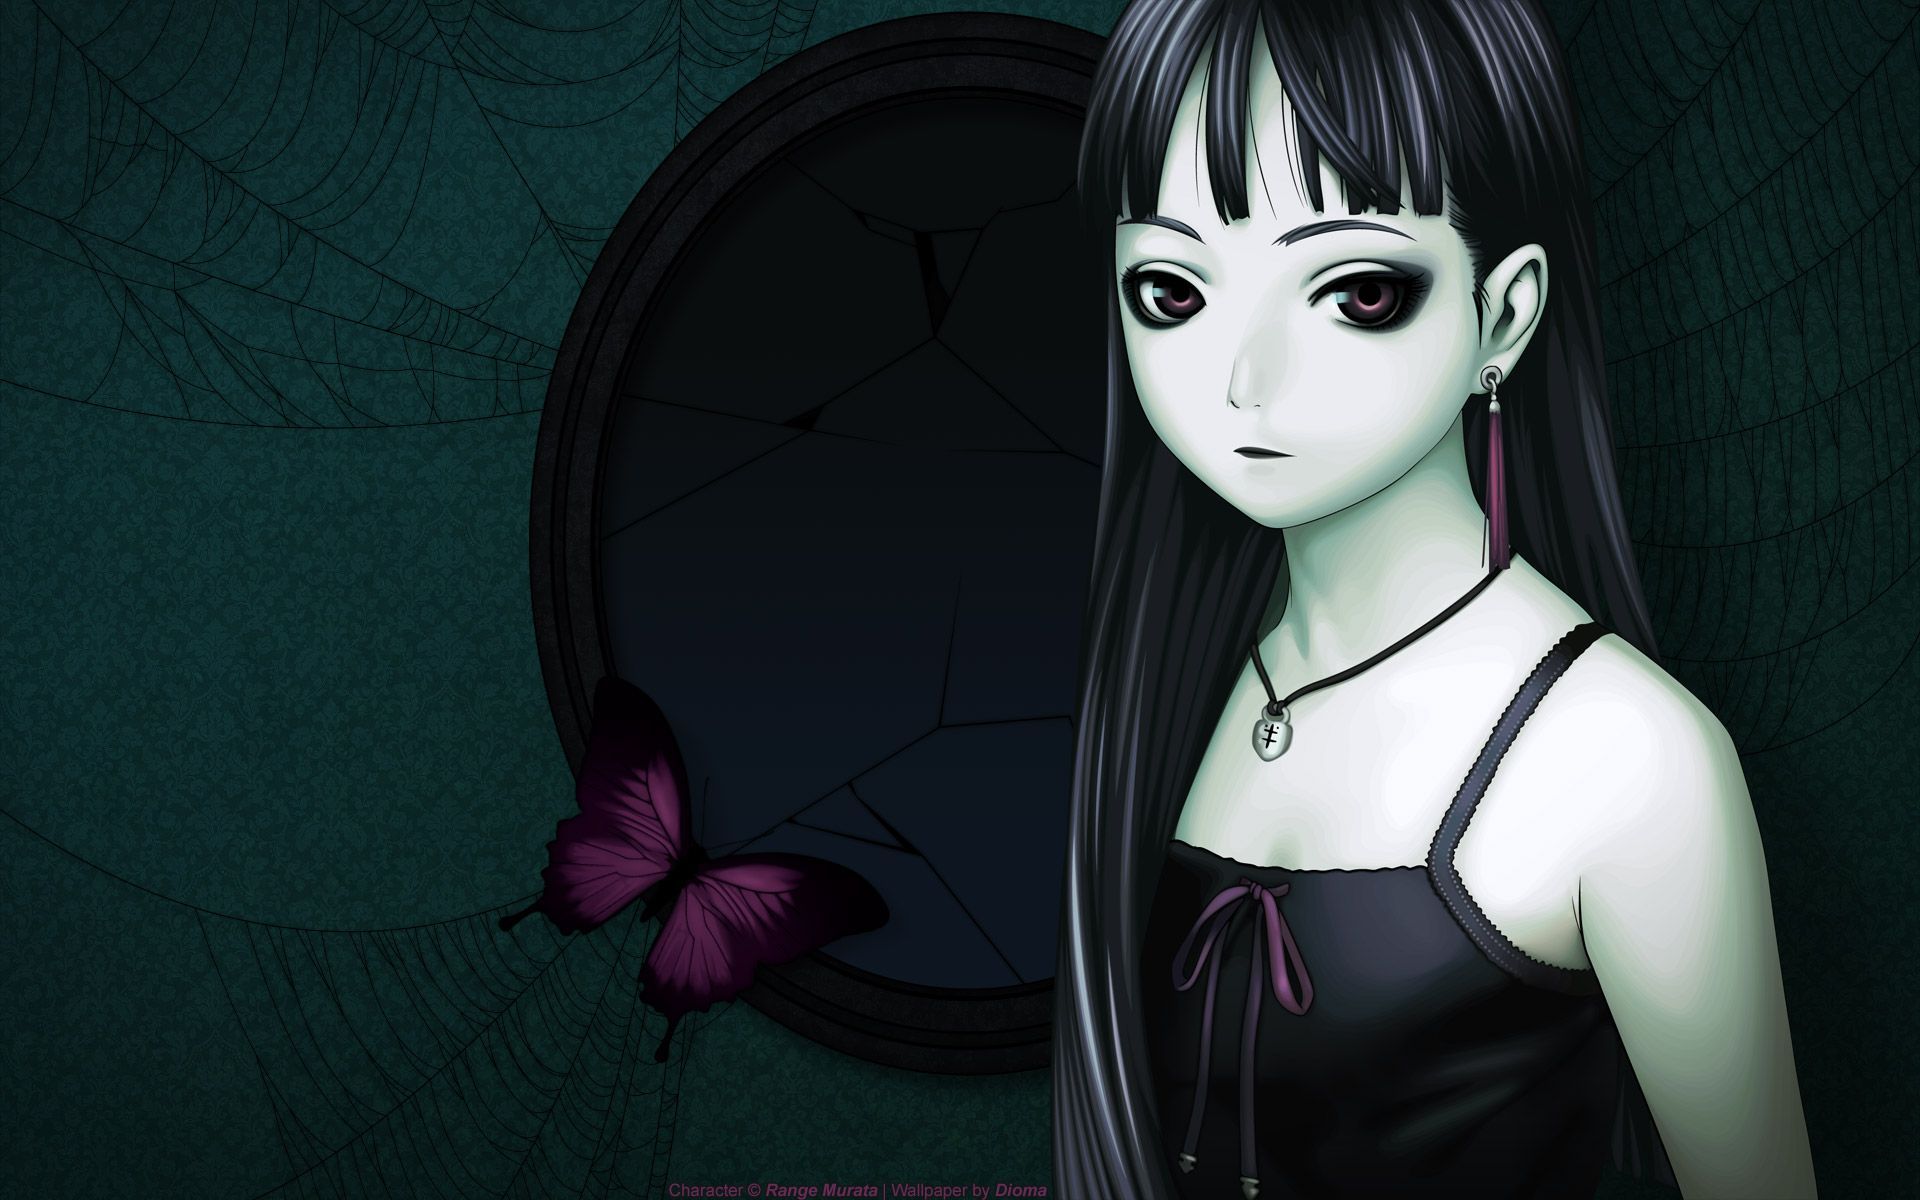 Download Anime Goth Girl Wallpaper 1920x1200. Full HD Background